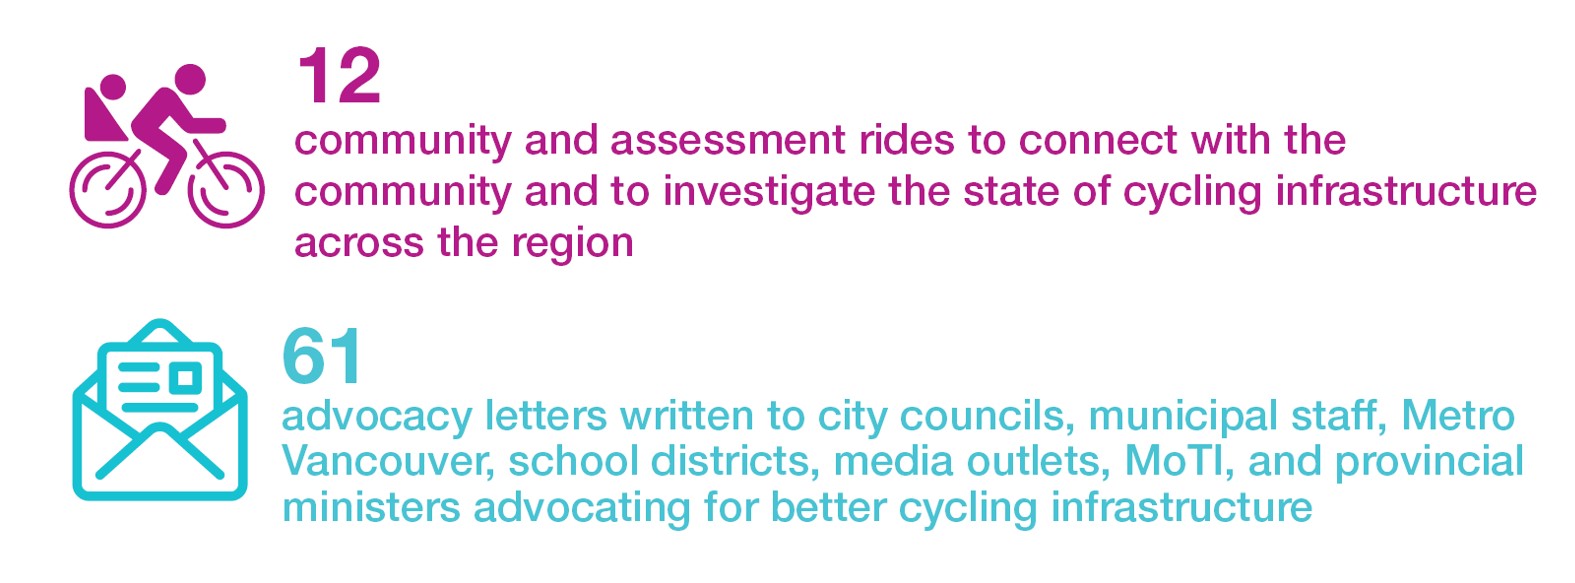 12 community and assessment rides to connect with the community and investigate the state of cycling infrastructure across the region. 61 advocacy letters written to city councils, municipal staff, Metro Vancouver, school districts, media outlets, MoTI, and provincial ministers advocating for better cycling infrastructure.